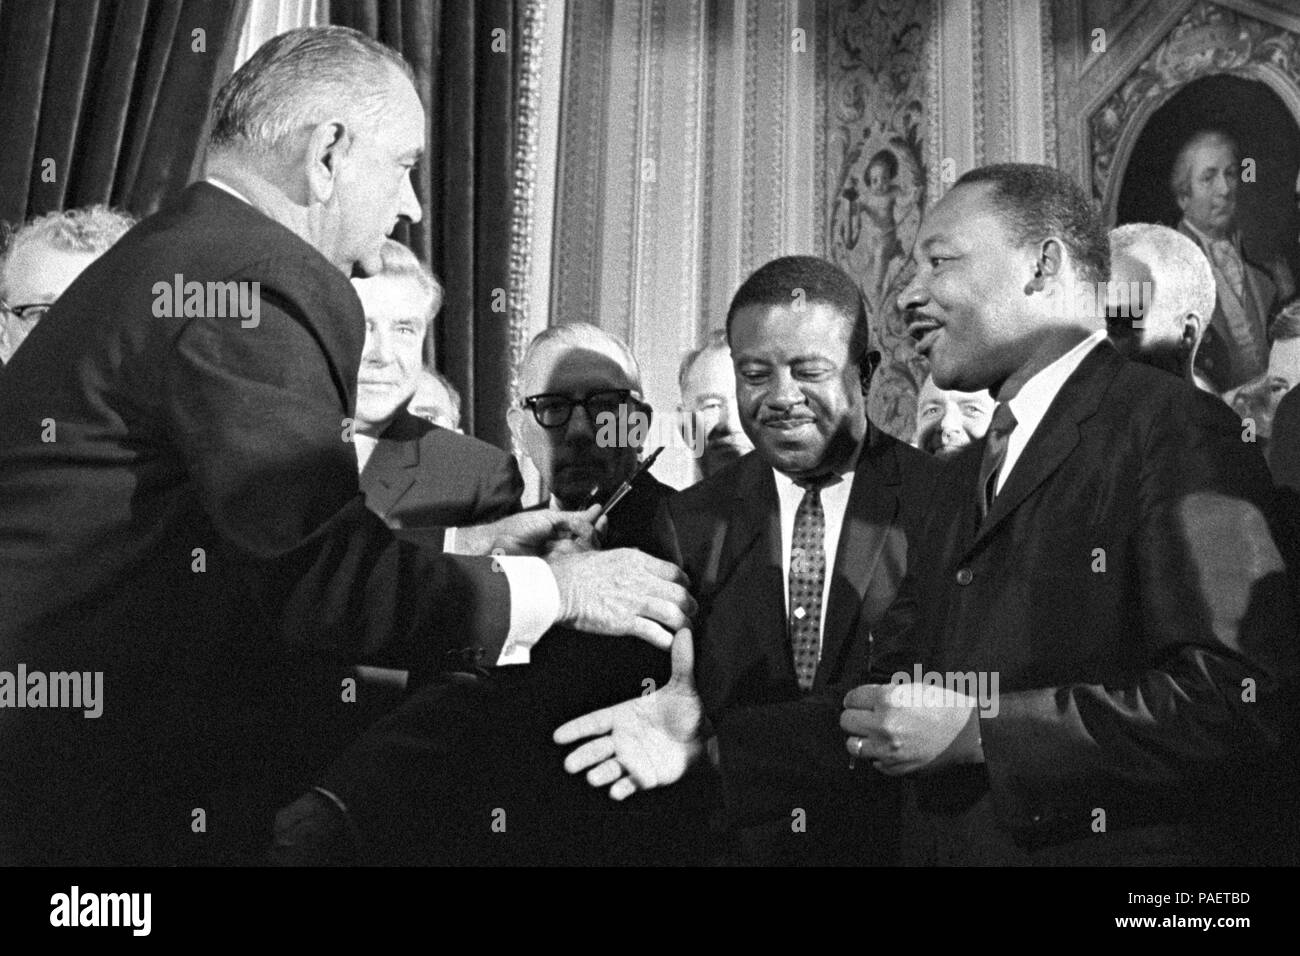 President Lyndon B. Johnson moves to shake hands with Dr. Martin Luther King  after the signing of the Voting Rights Act on August 6, 1965 in the  President's Room of the U.S.